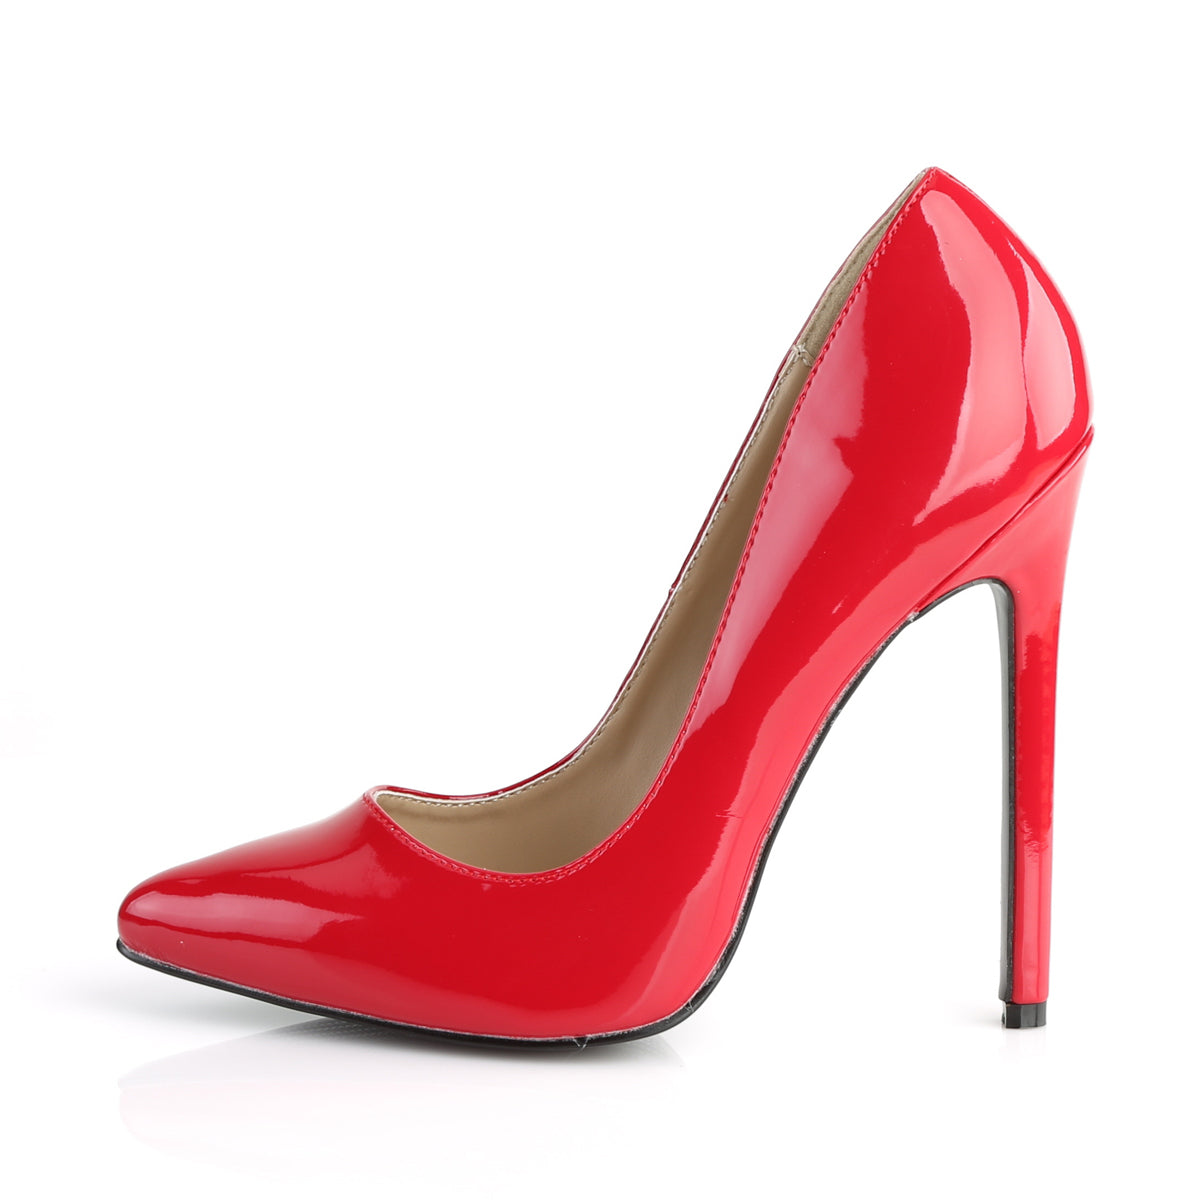 SEXY-20 Pleasers Shoes 5 Inch Heel Red Fetish Footwear – Pole Dancing ...